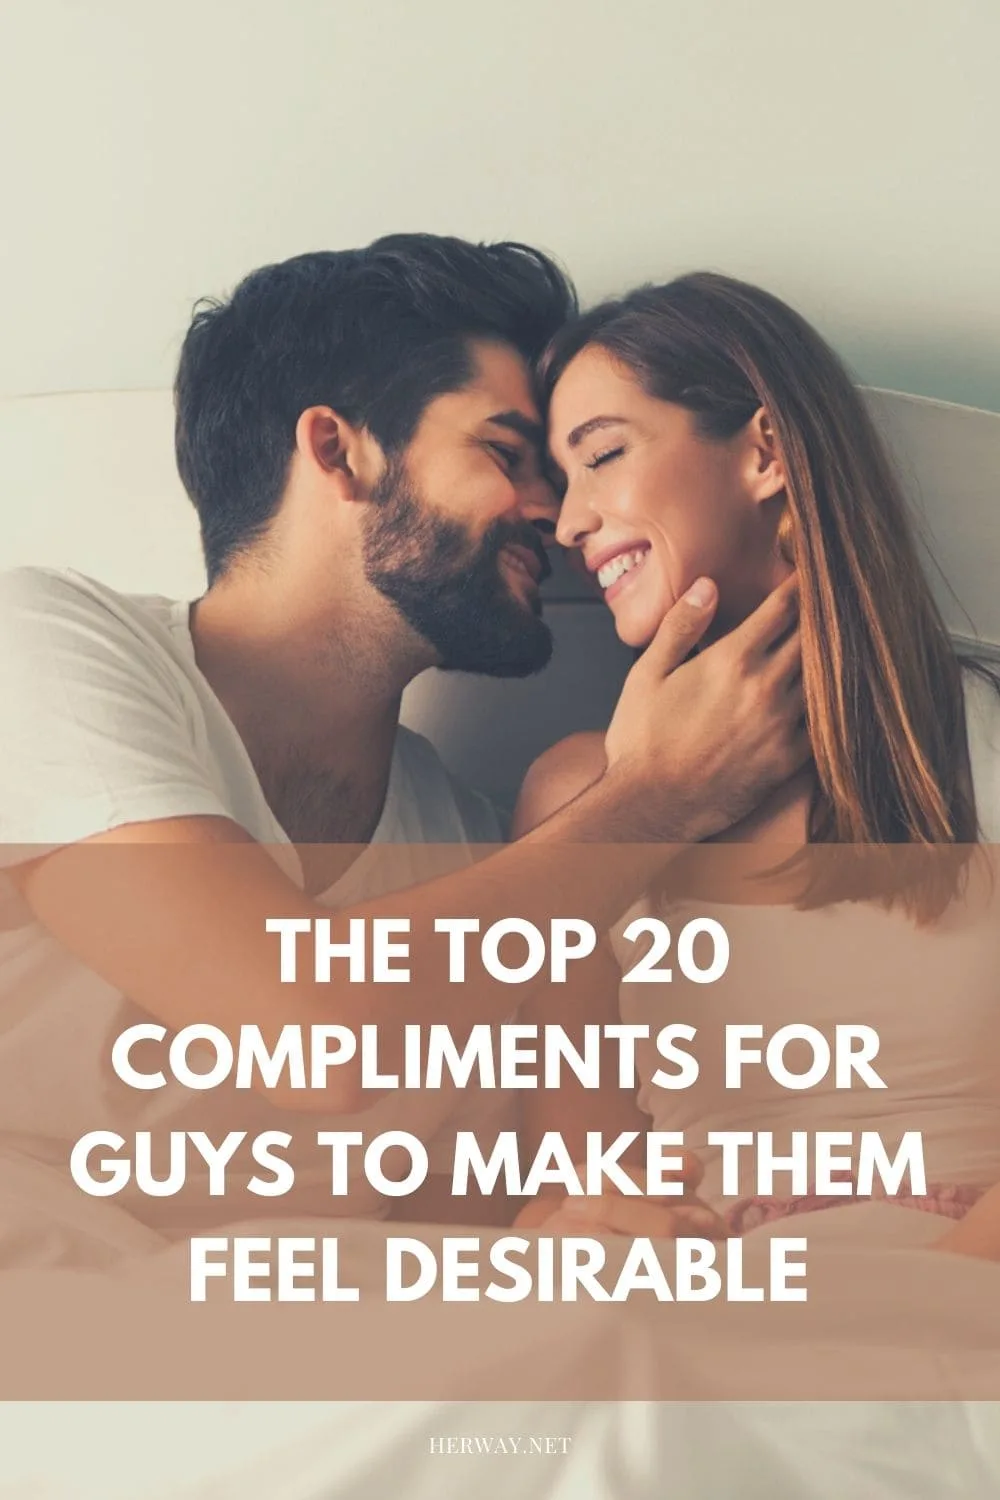 The Top 20 Compliments For Guys To Make Them Feel Desirable